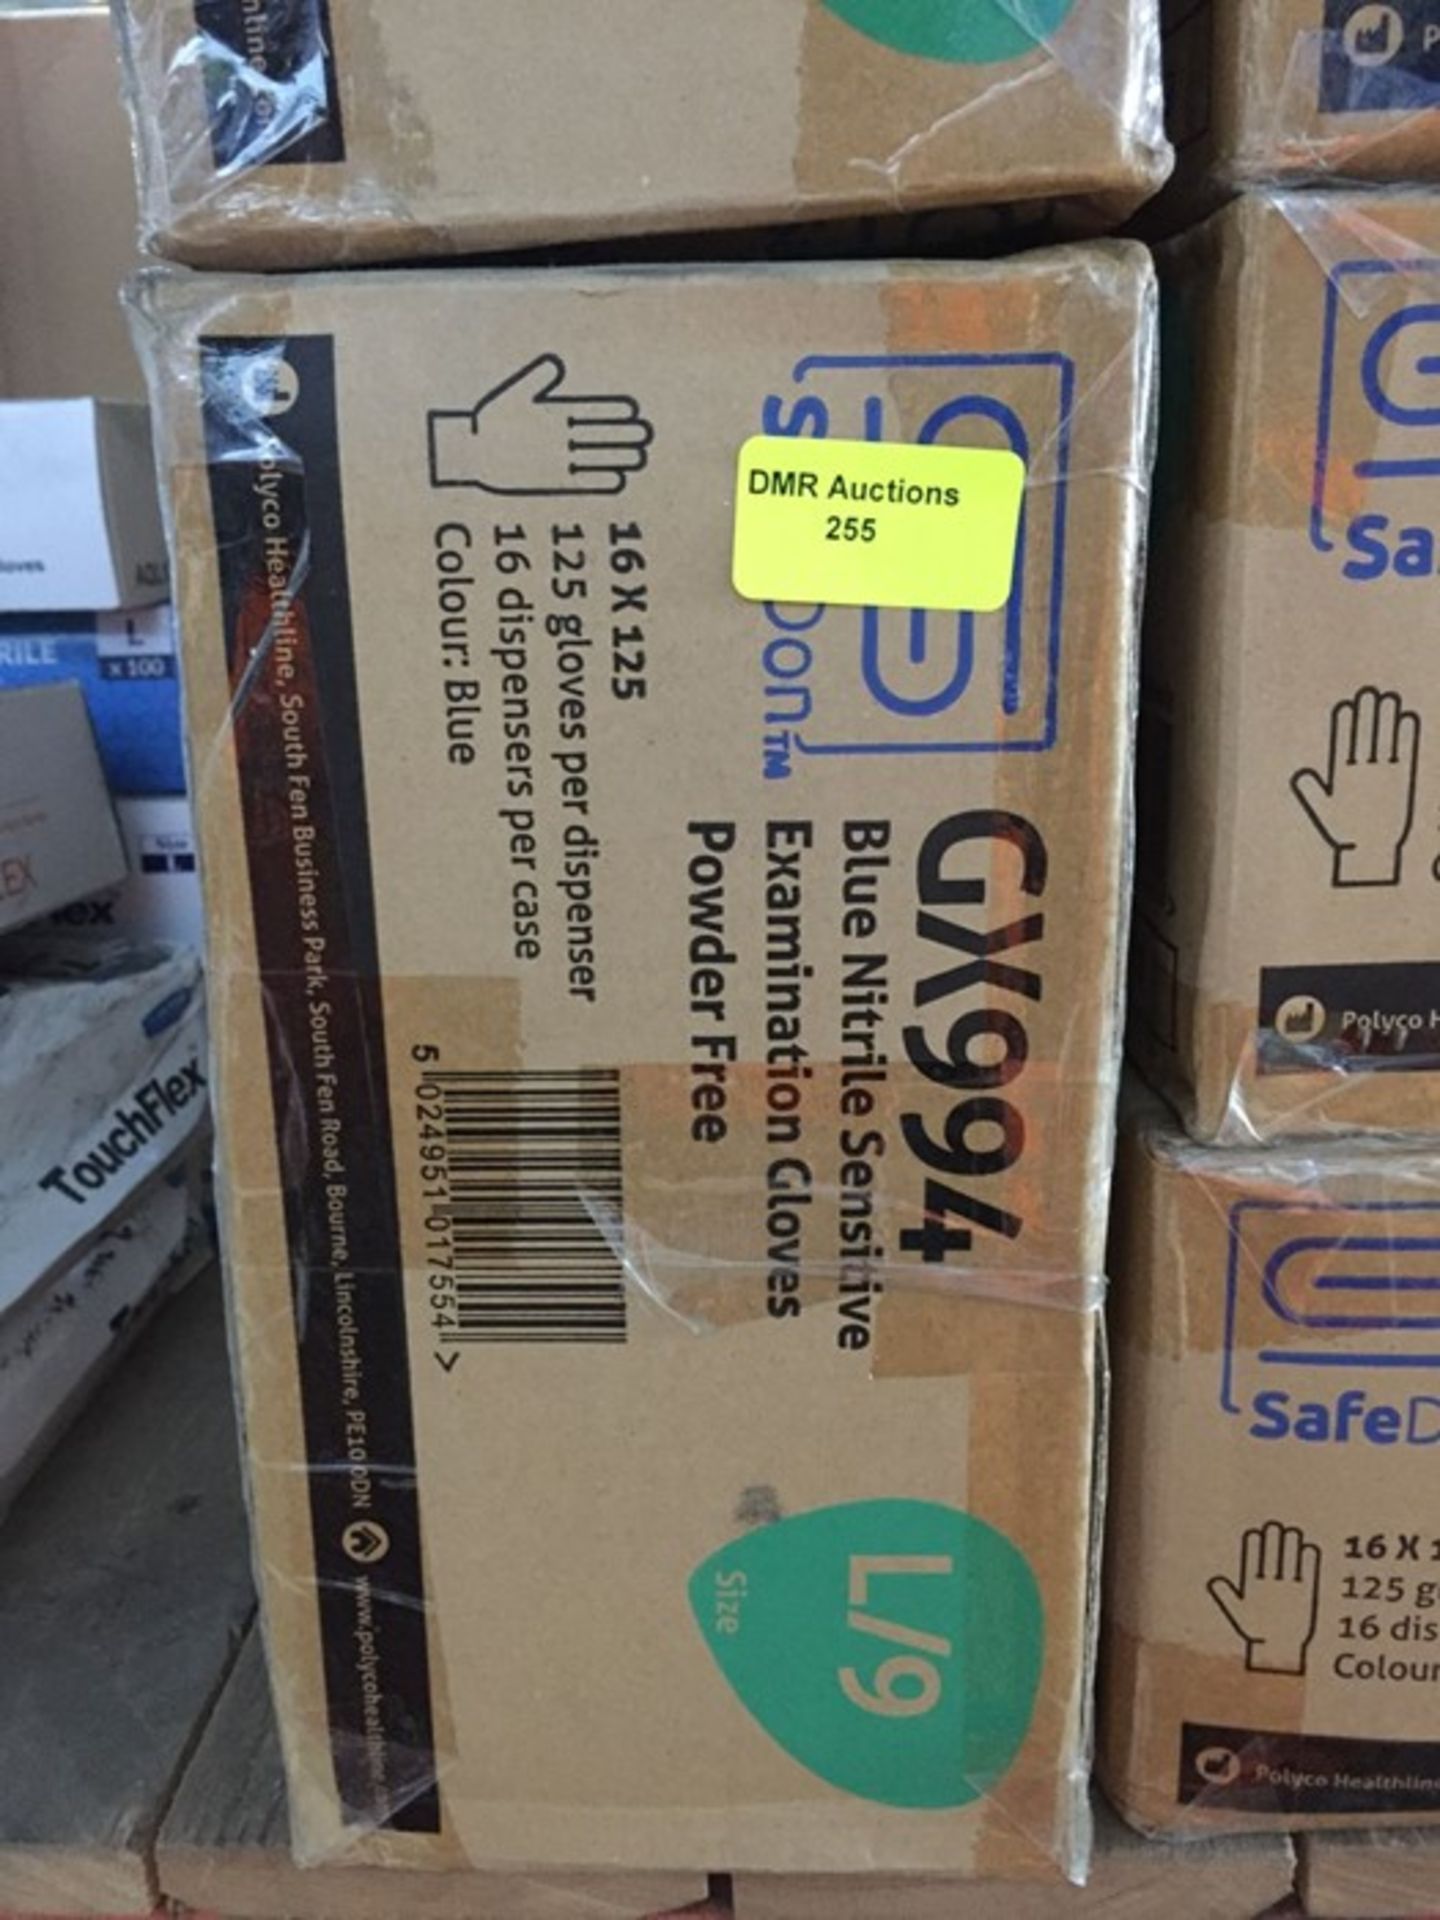 ONE LOT TO CONTAIN A BOX OF SAFEDON GX994 POWDER FREE GLOVES (QTY750 PAIRS PER BOX)